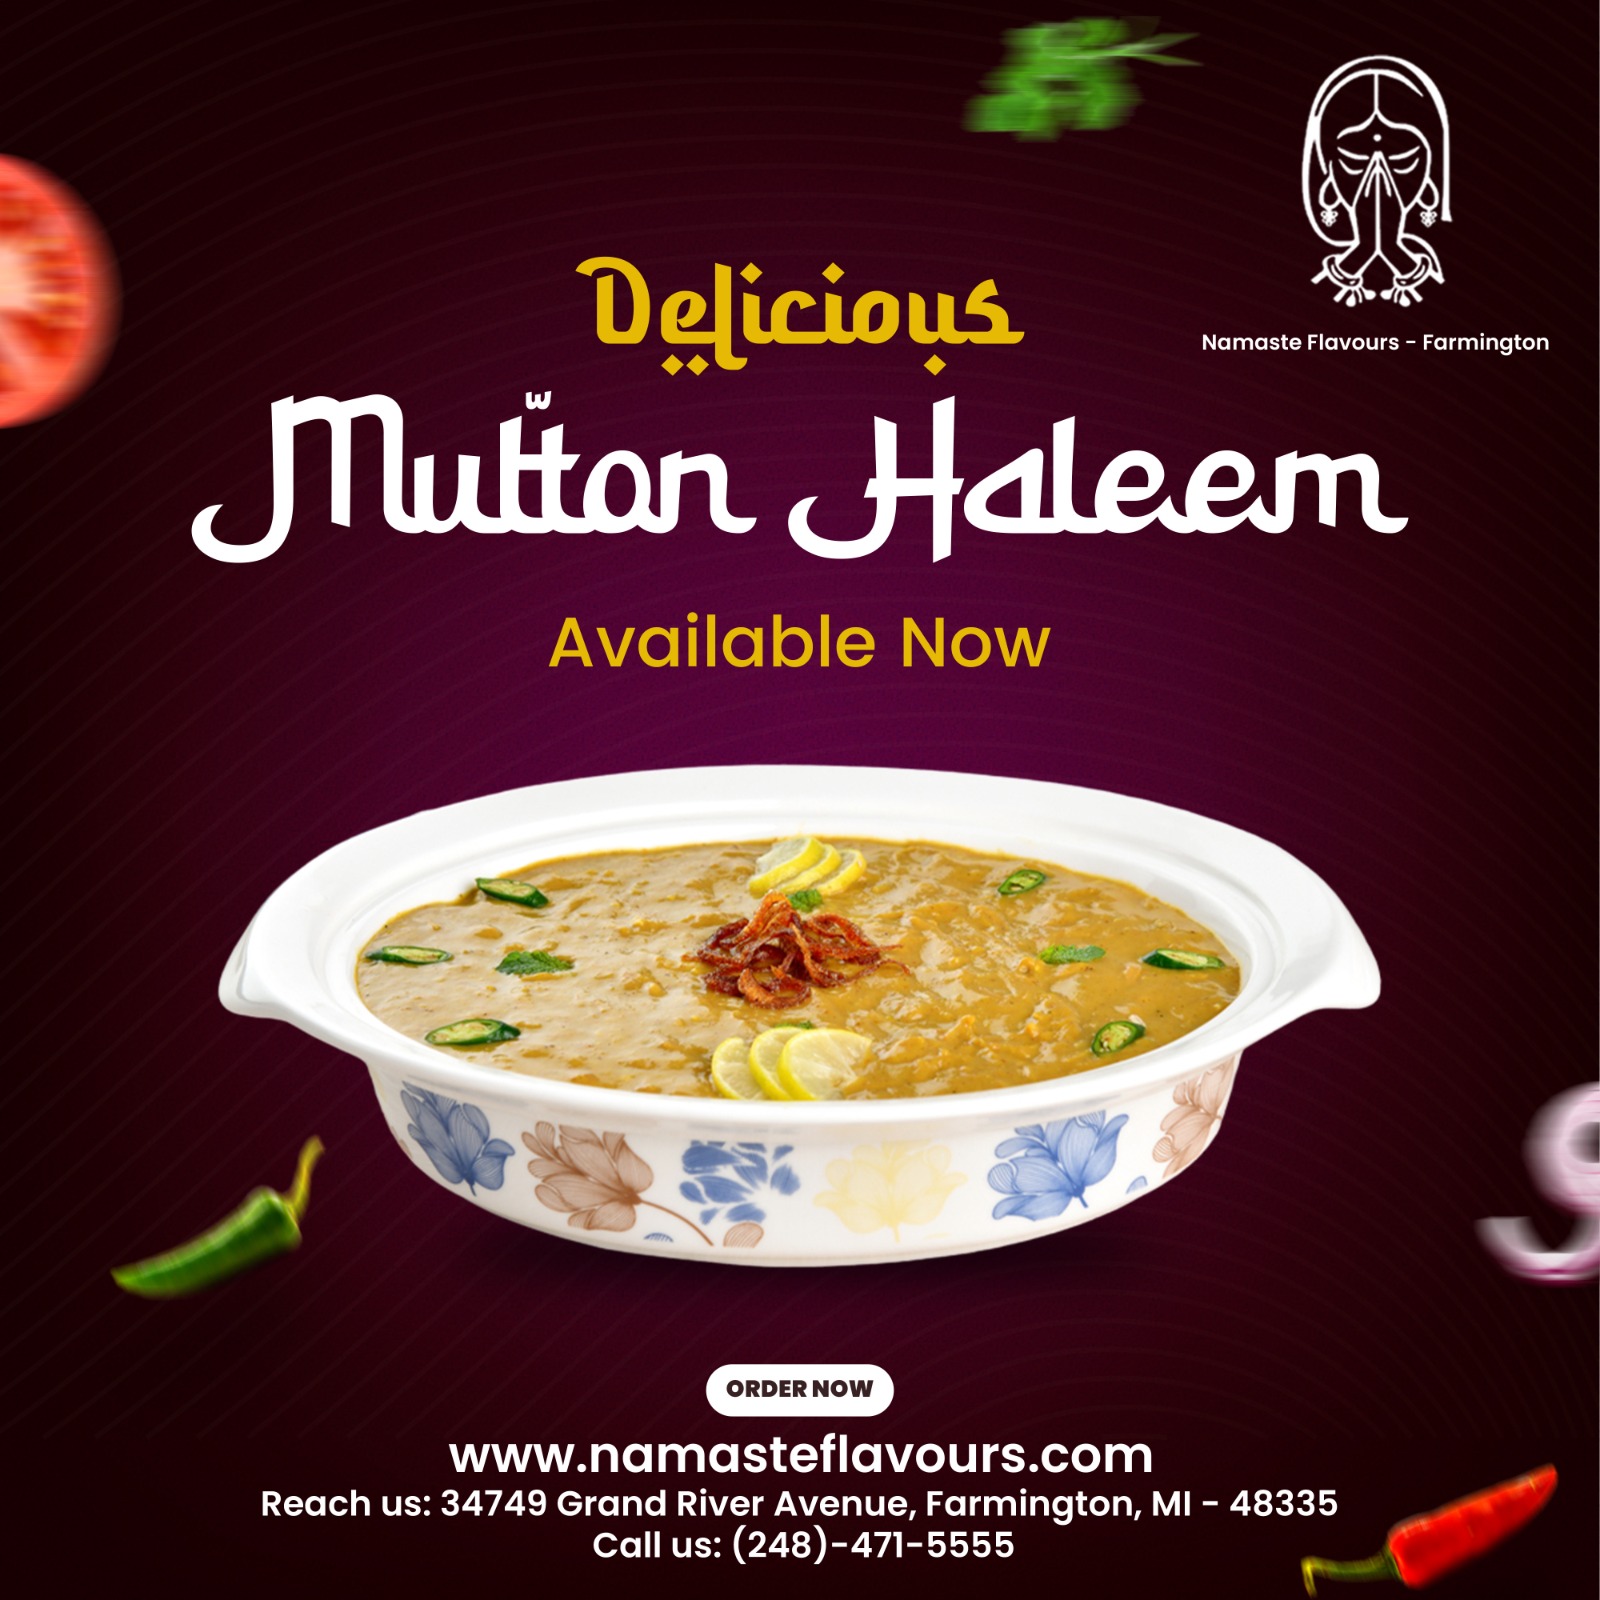 Tantalize your taste buds with our mouth-watering Mutton Haleem, now available! 